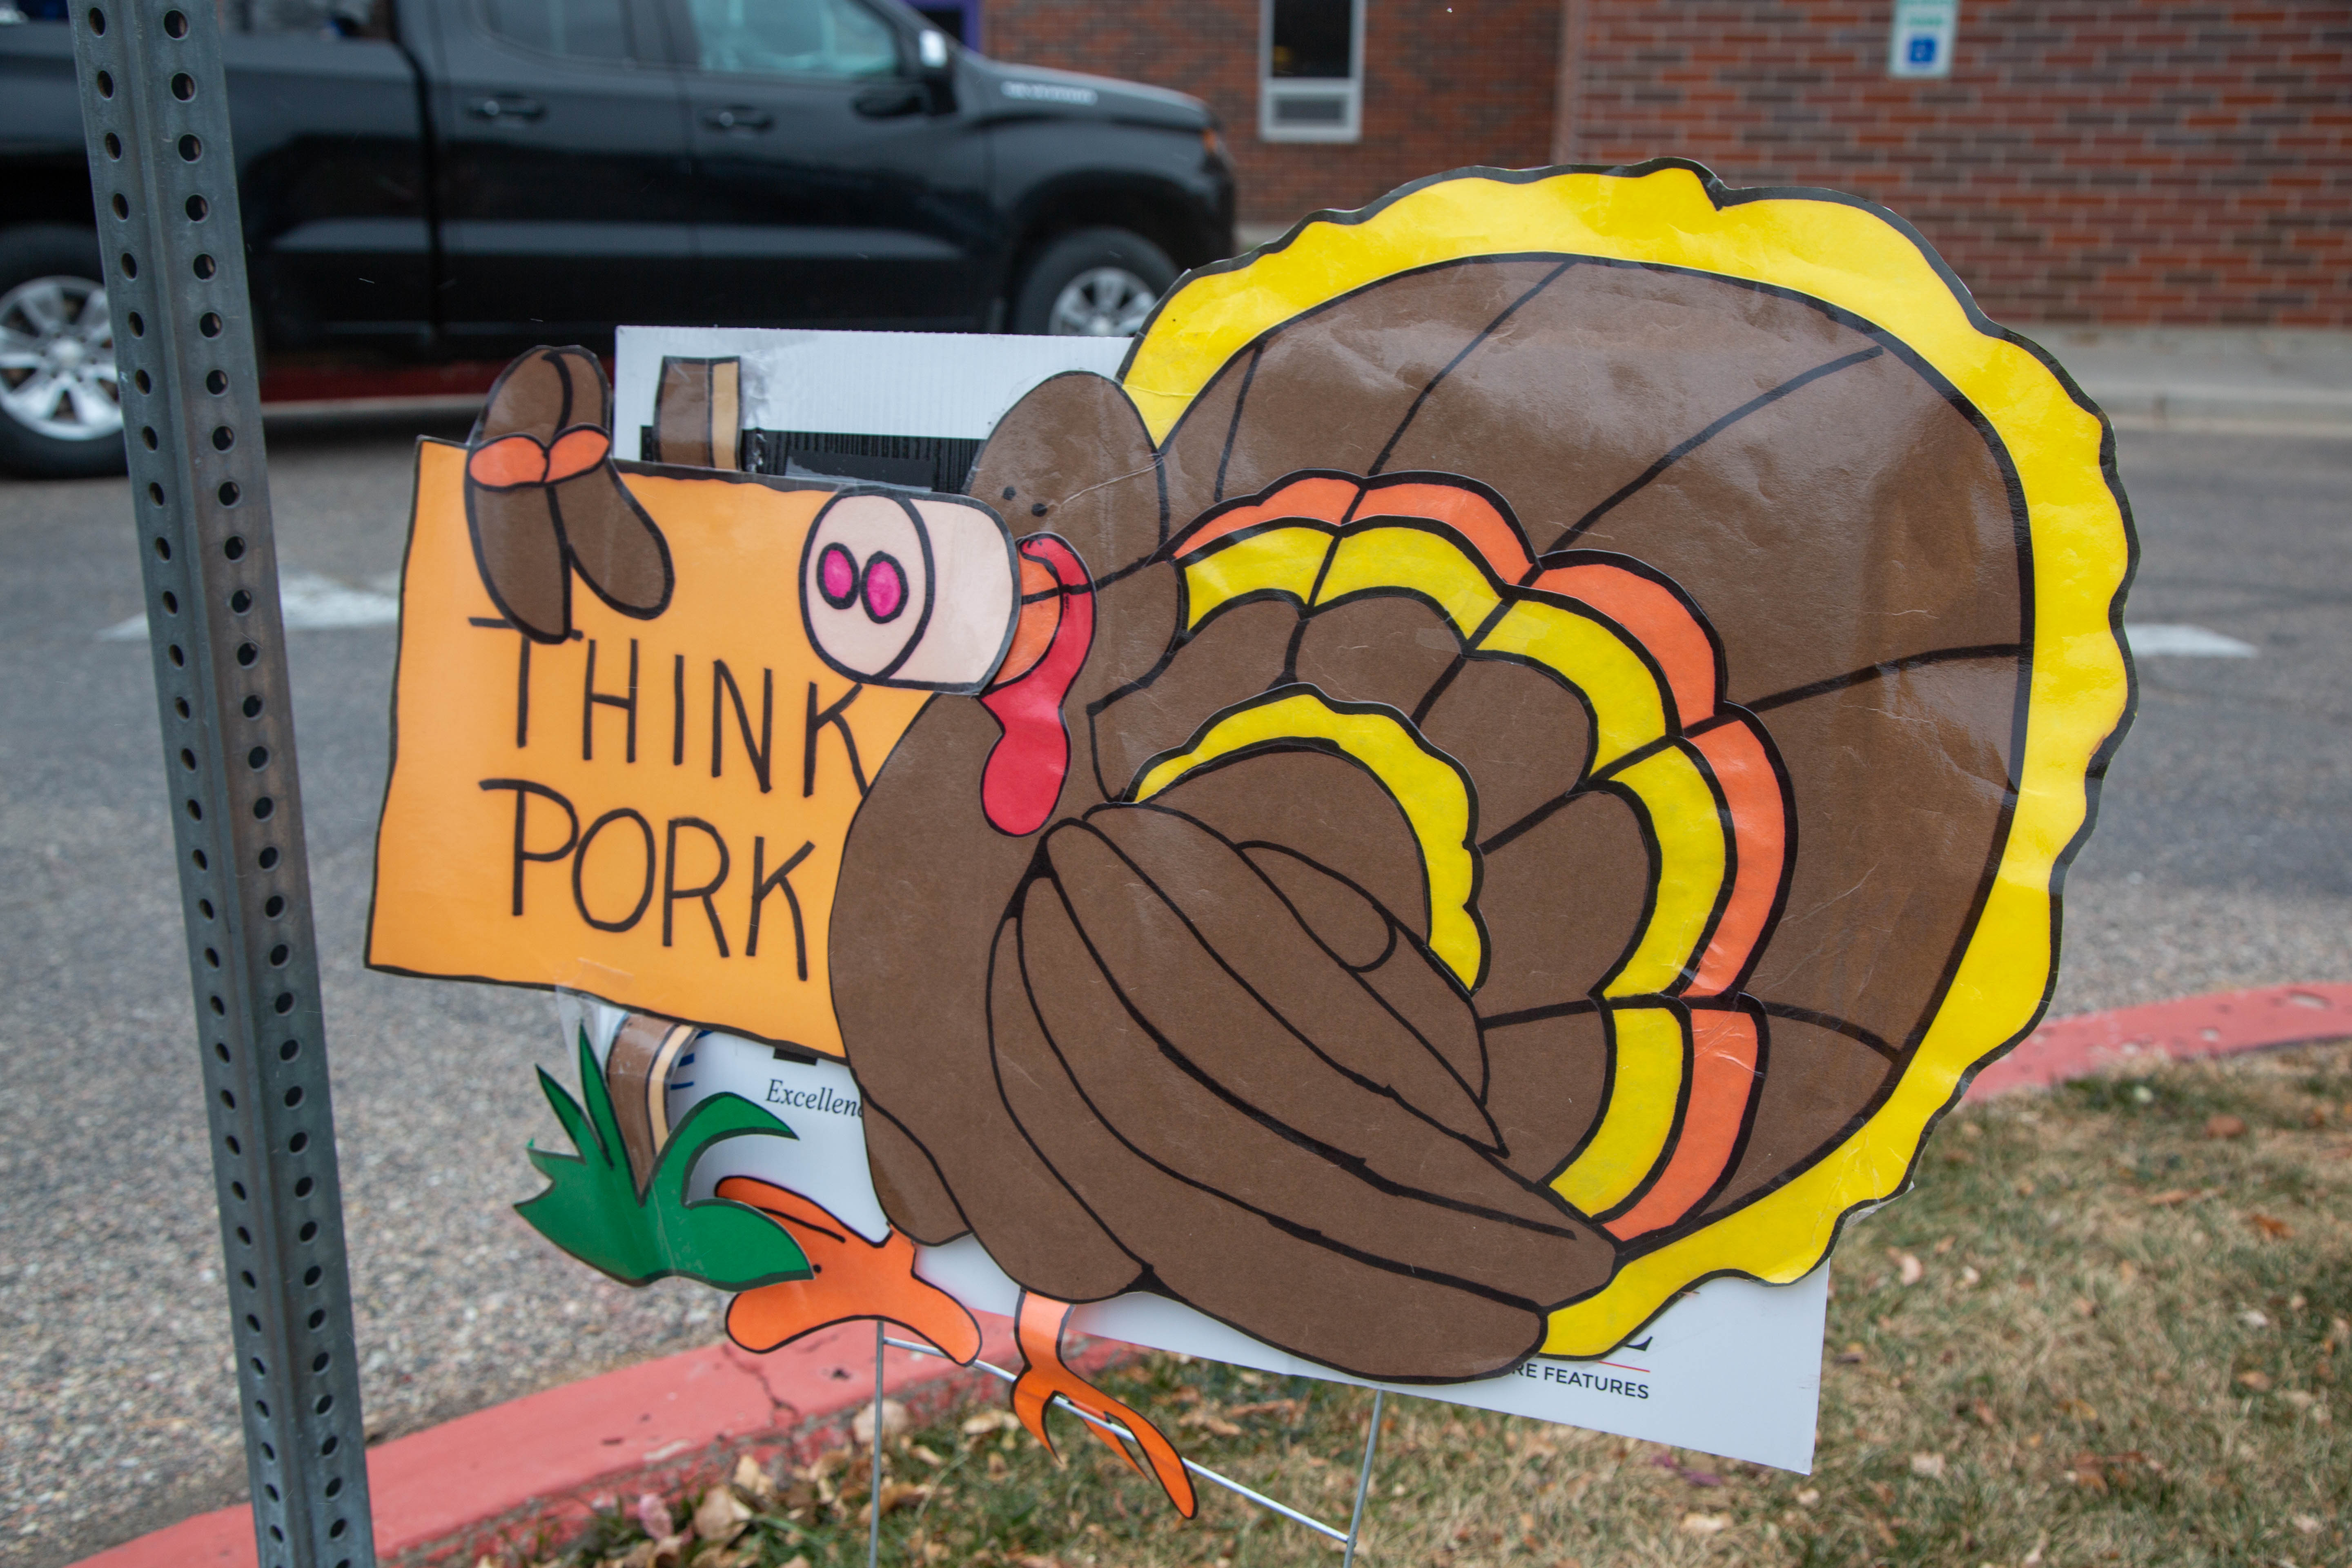 A picture of a turkey with "Think Pork" sign by its side. 